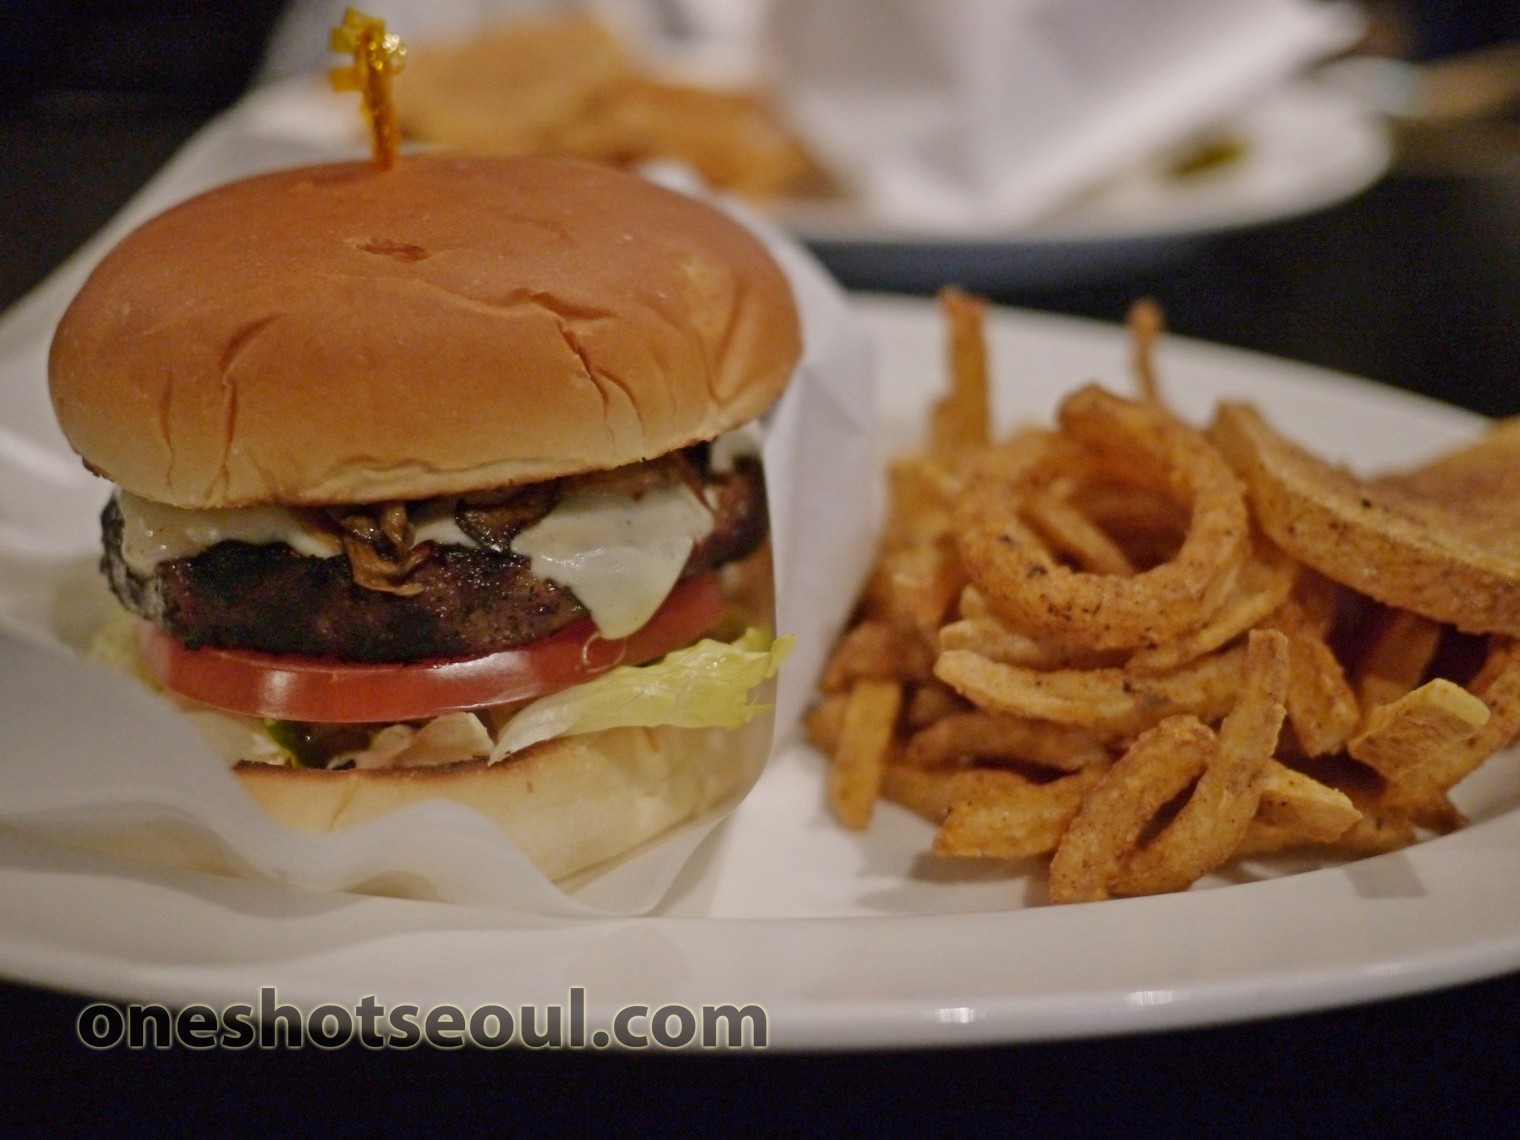 The bar serves up delicious, filling burgers, and a host of other town pub